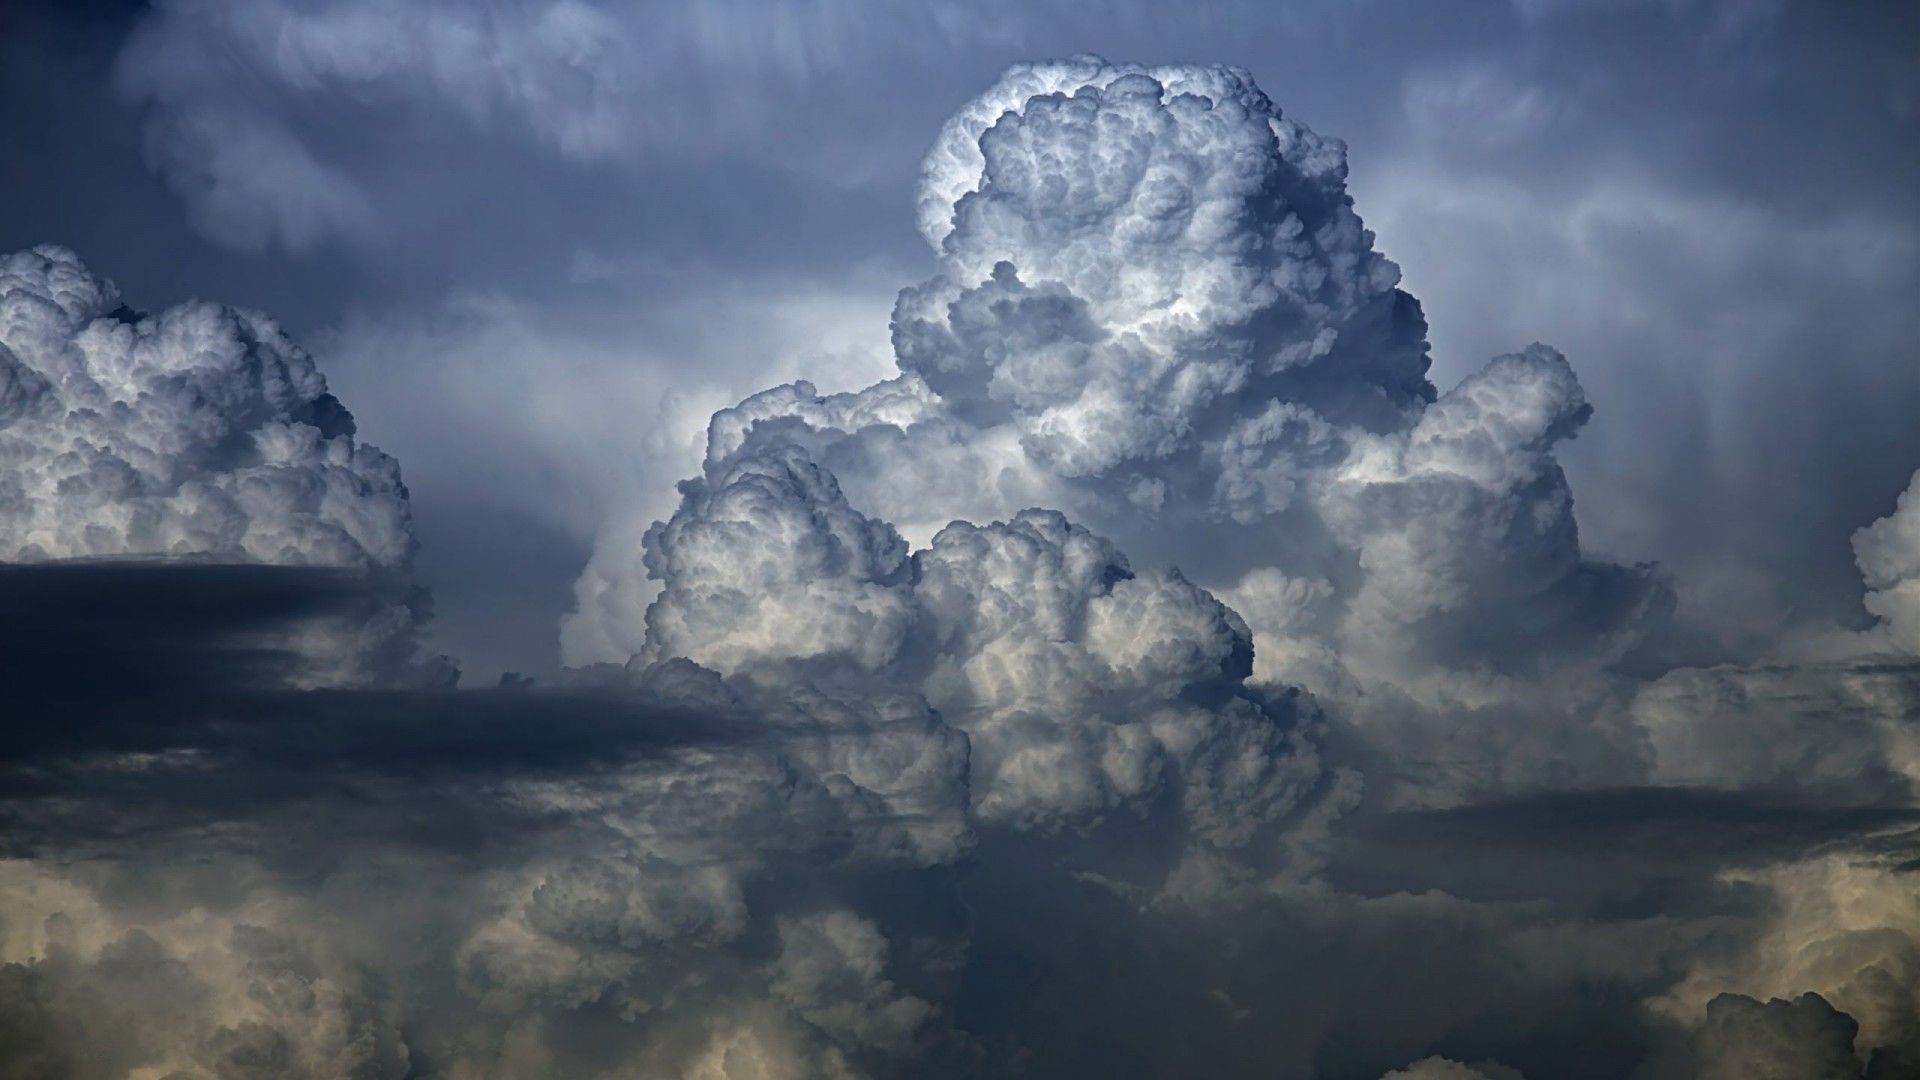 1920x1080 Growing Cumulus Clouds certain to bring rain and storms. | Clouds, Cloud wallpaper, Cloud photos